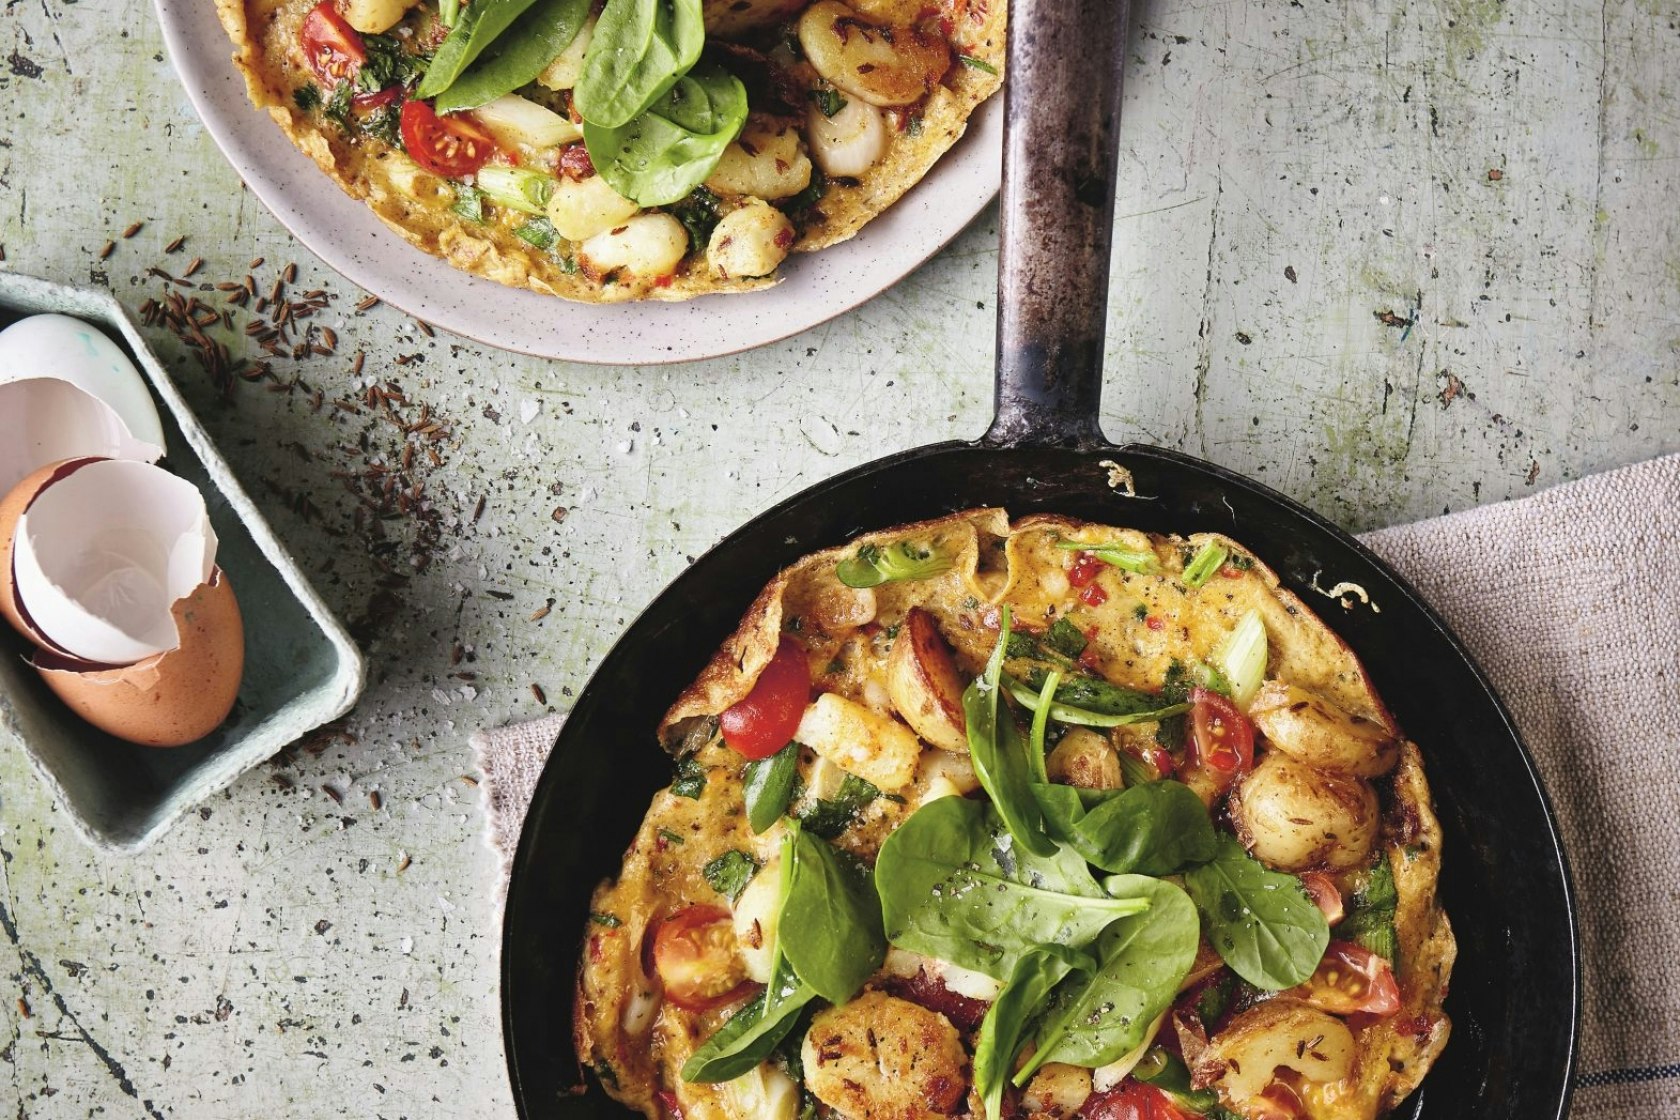 Best frittata and omelette recipes to make at home